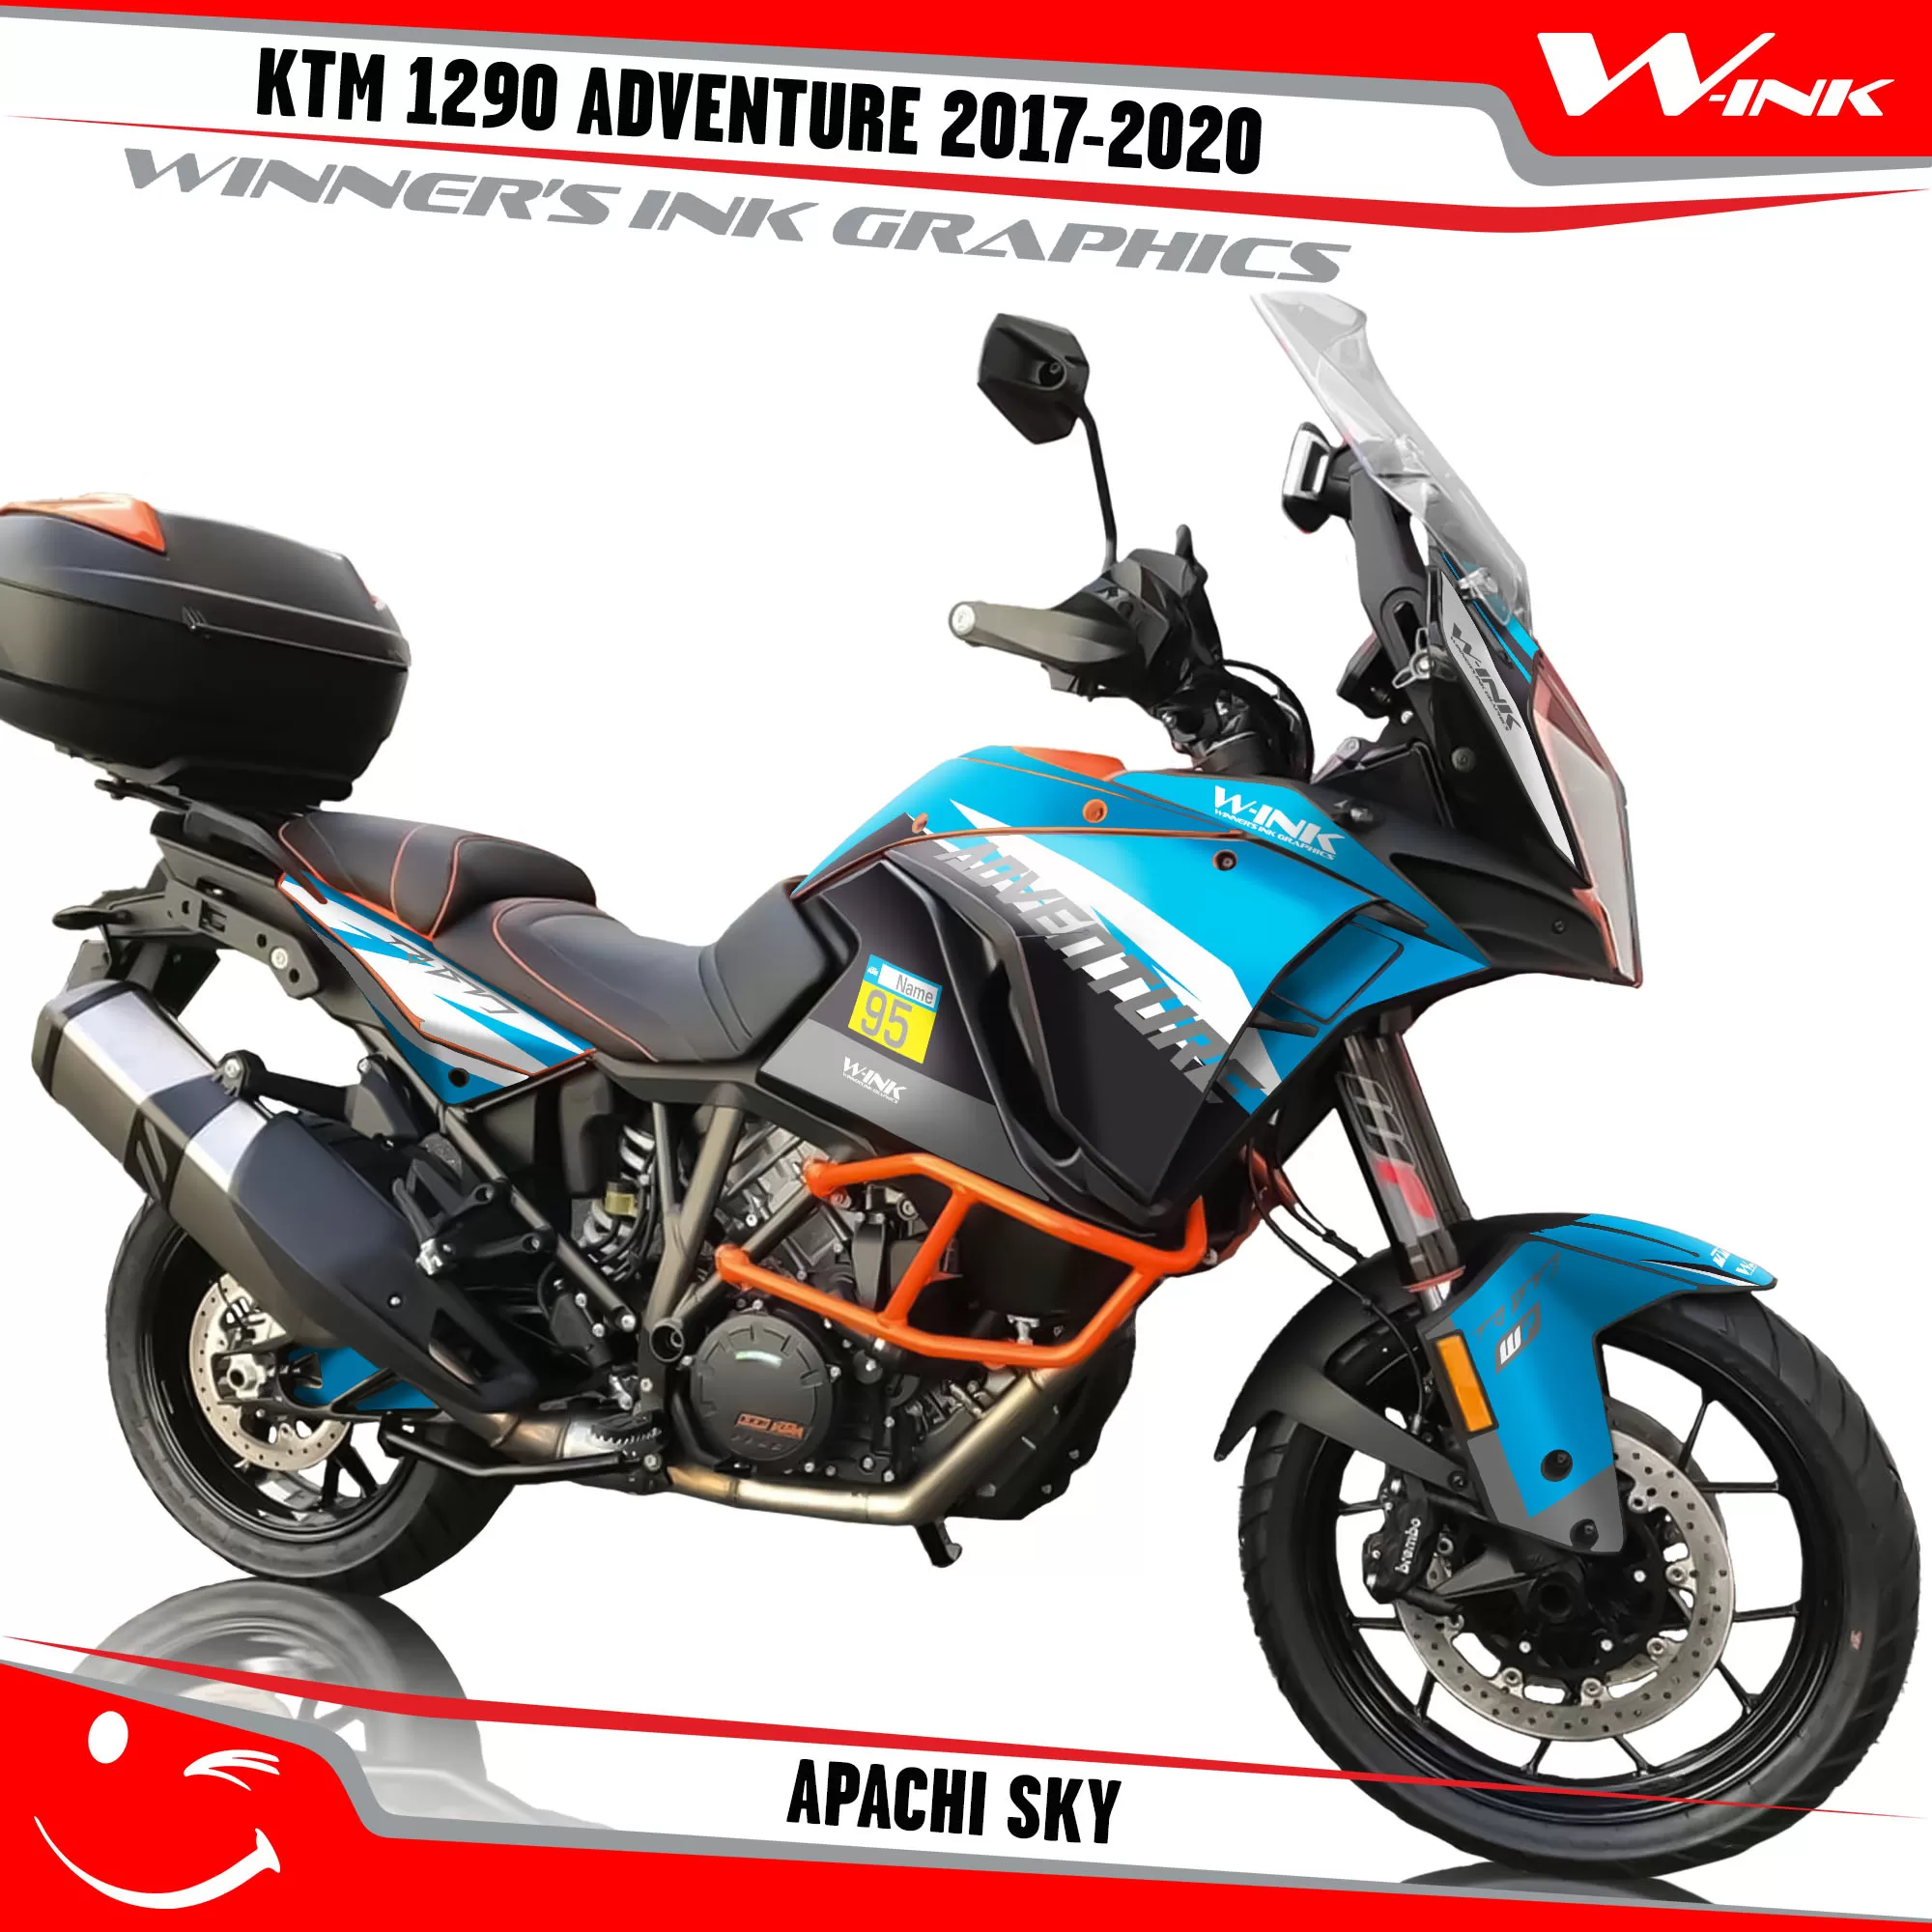 KTM-Adventure-1290-2017-2018-2019-2020-graphics-kit-and-decals-Apachi-Sky